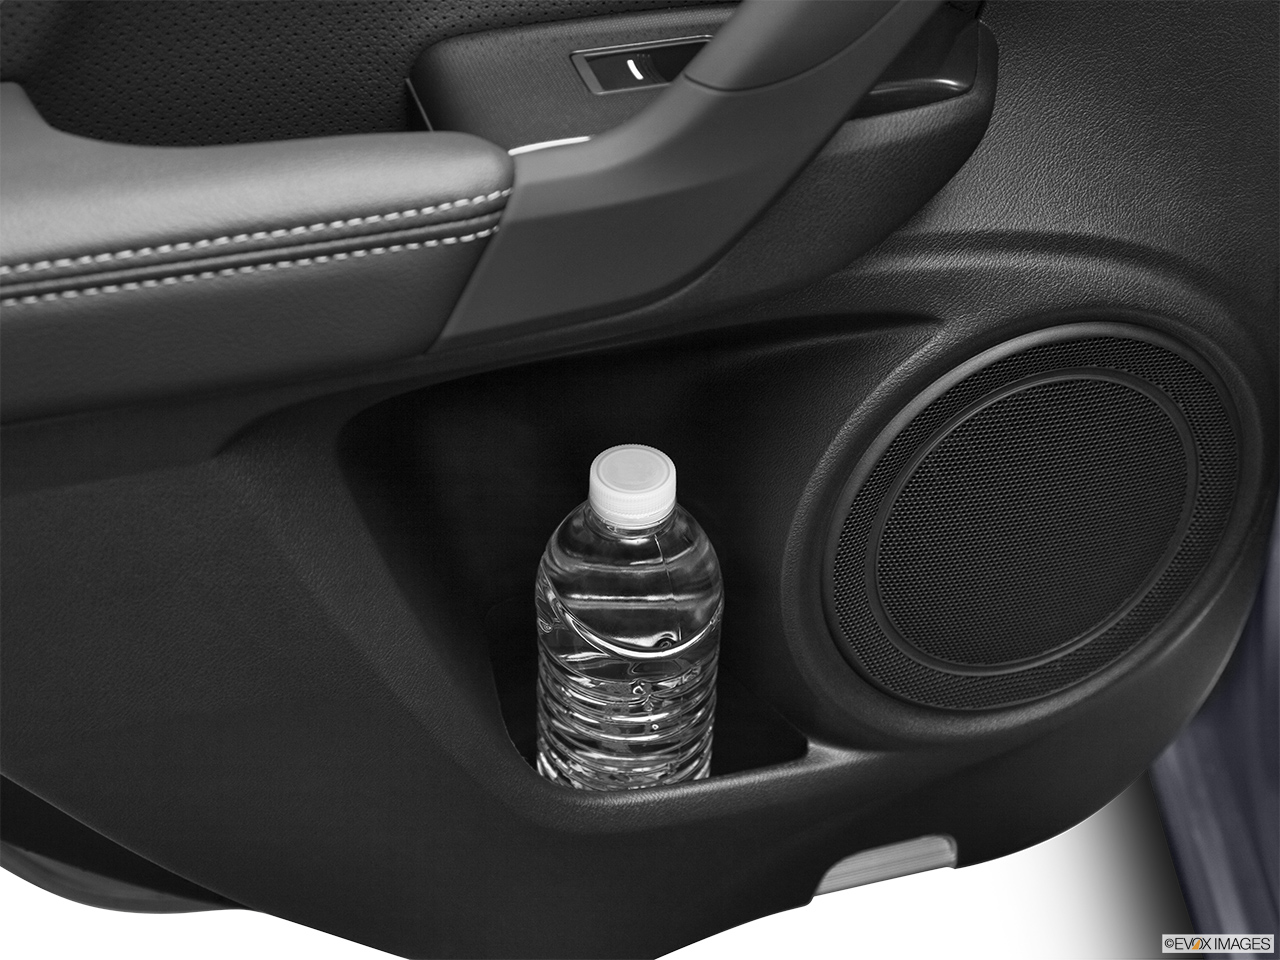 2012 Acura TSX V6 Second row side cup holder with coffee prop, or second row door cup holder with water bottle. 